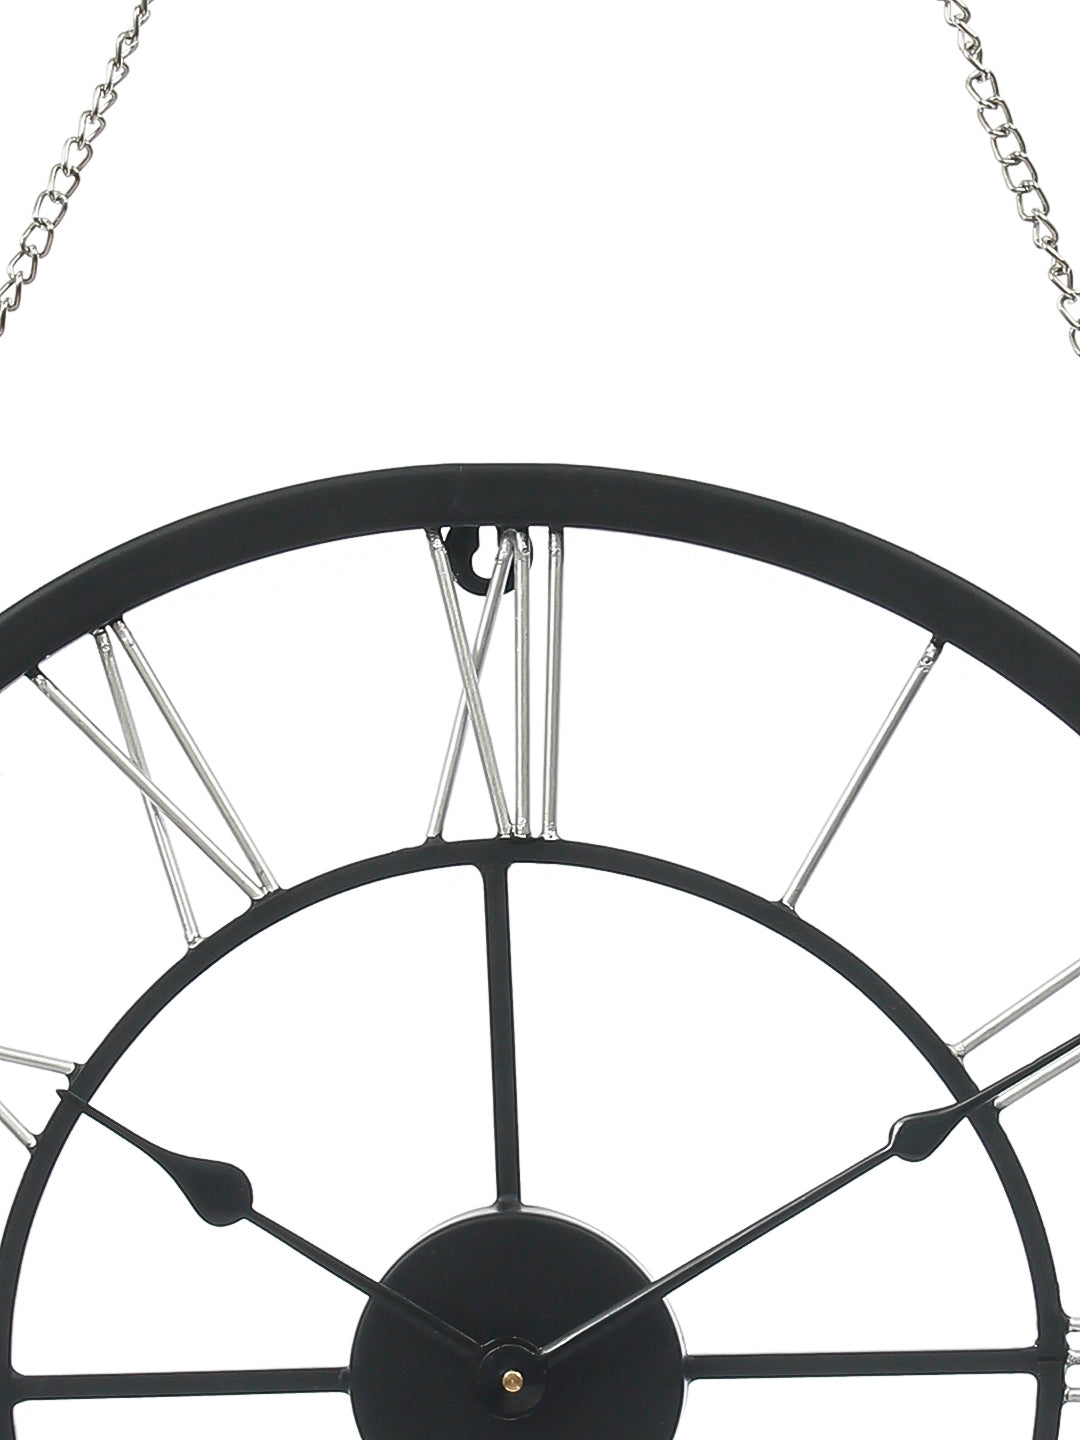 Round Black Iron Roman Numeral Handcrafted Analog Wall Clock With Hanging Chain 4